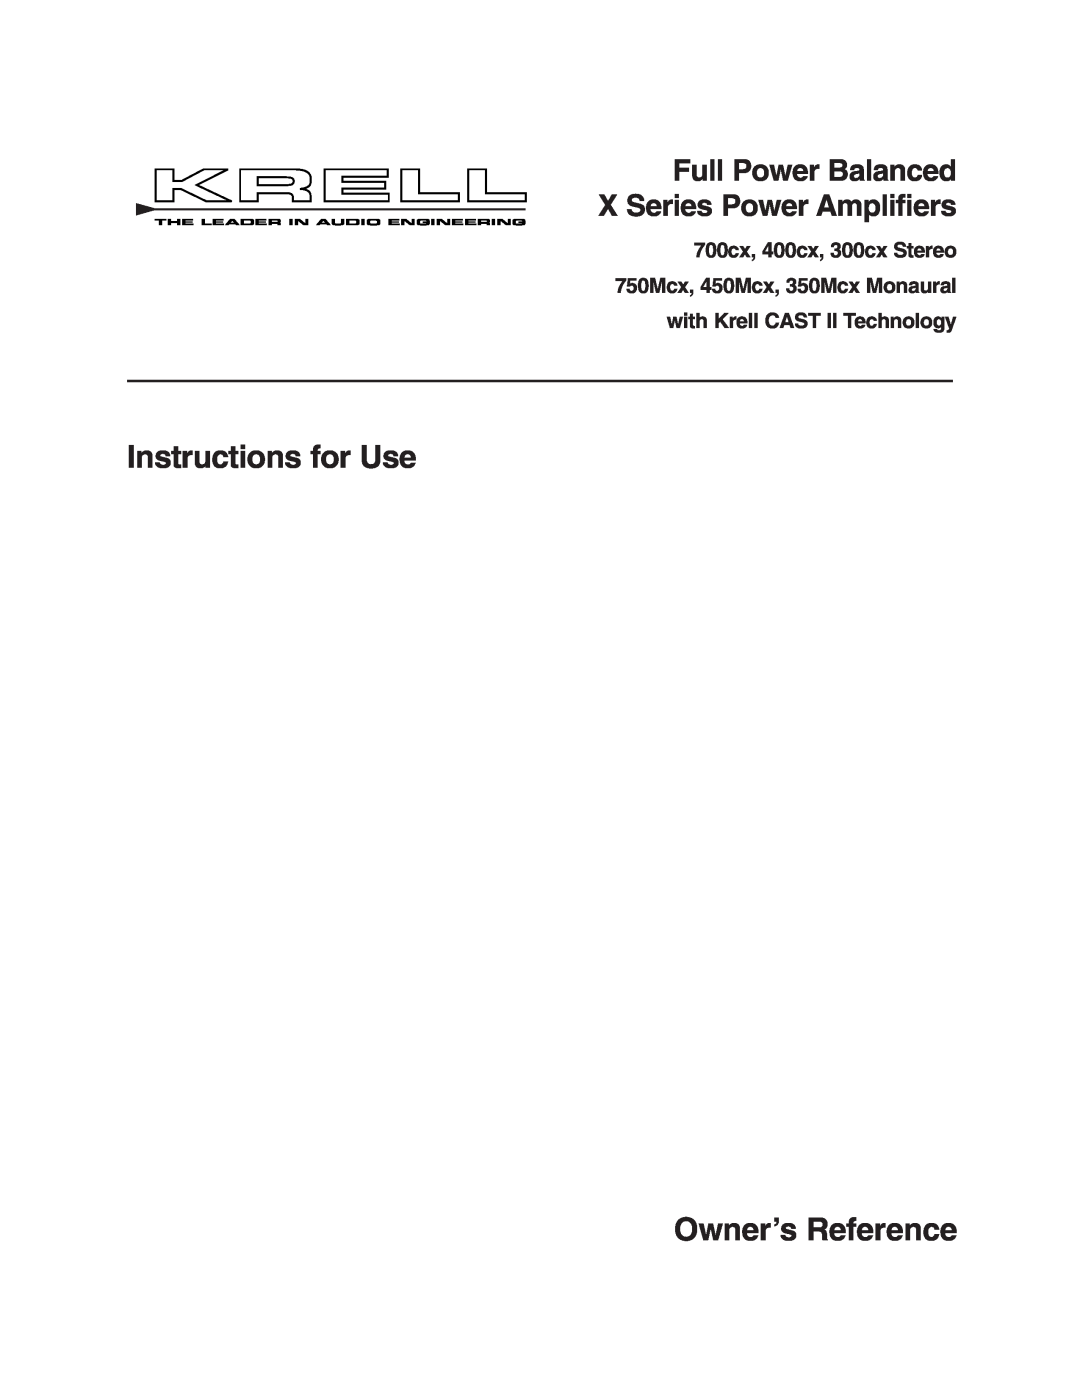 Krell Industries 450Mcx manual Instructions for Use, Owner’s Reference, Full Power Balanced X Series Power Amplifiers 